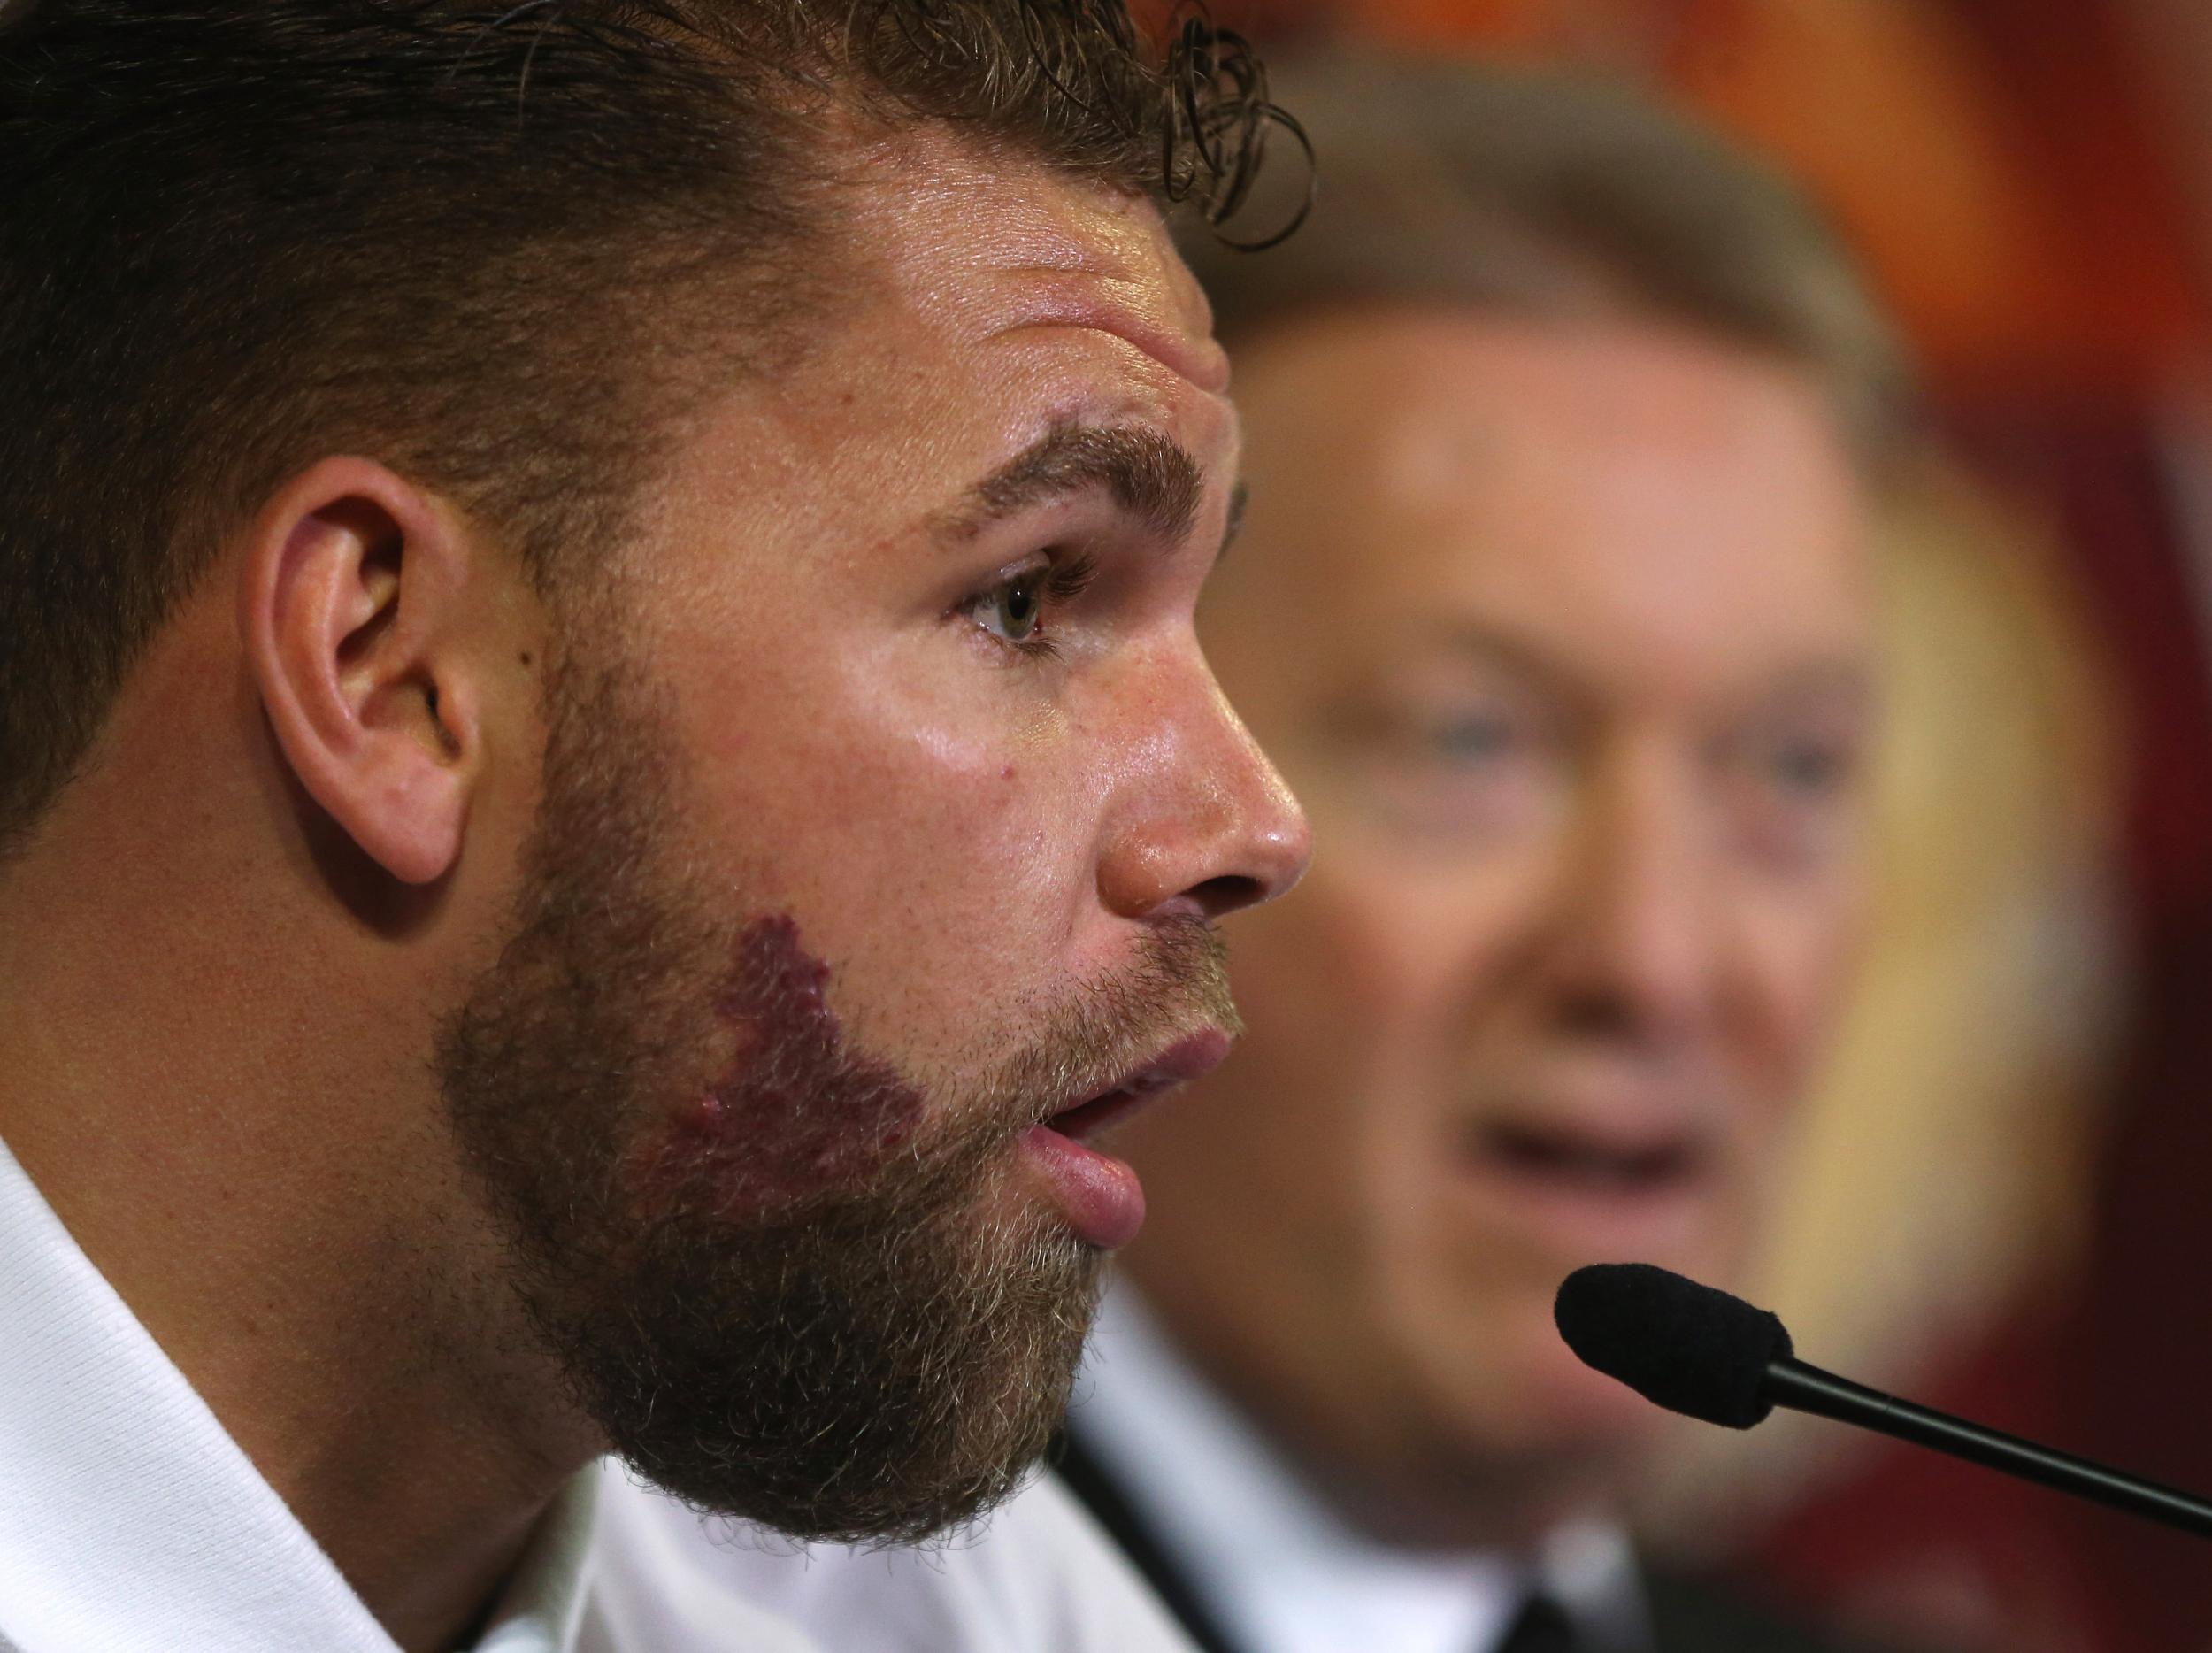 Saunders last fought in December when he outpointed Artur Akavov